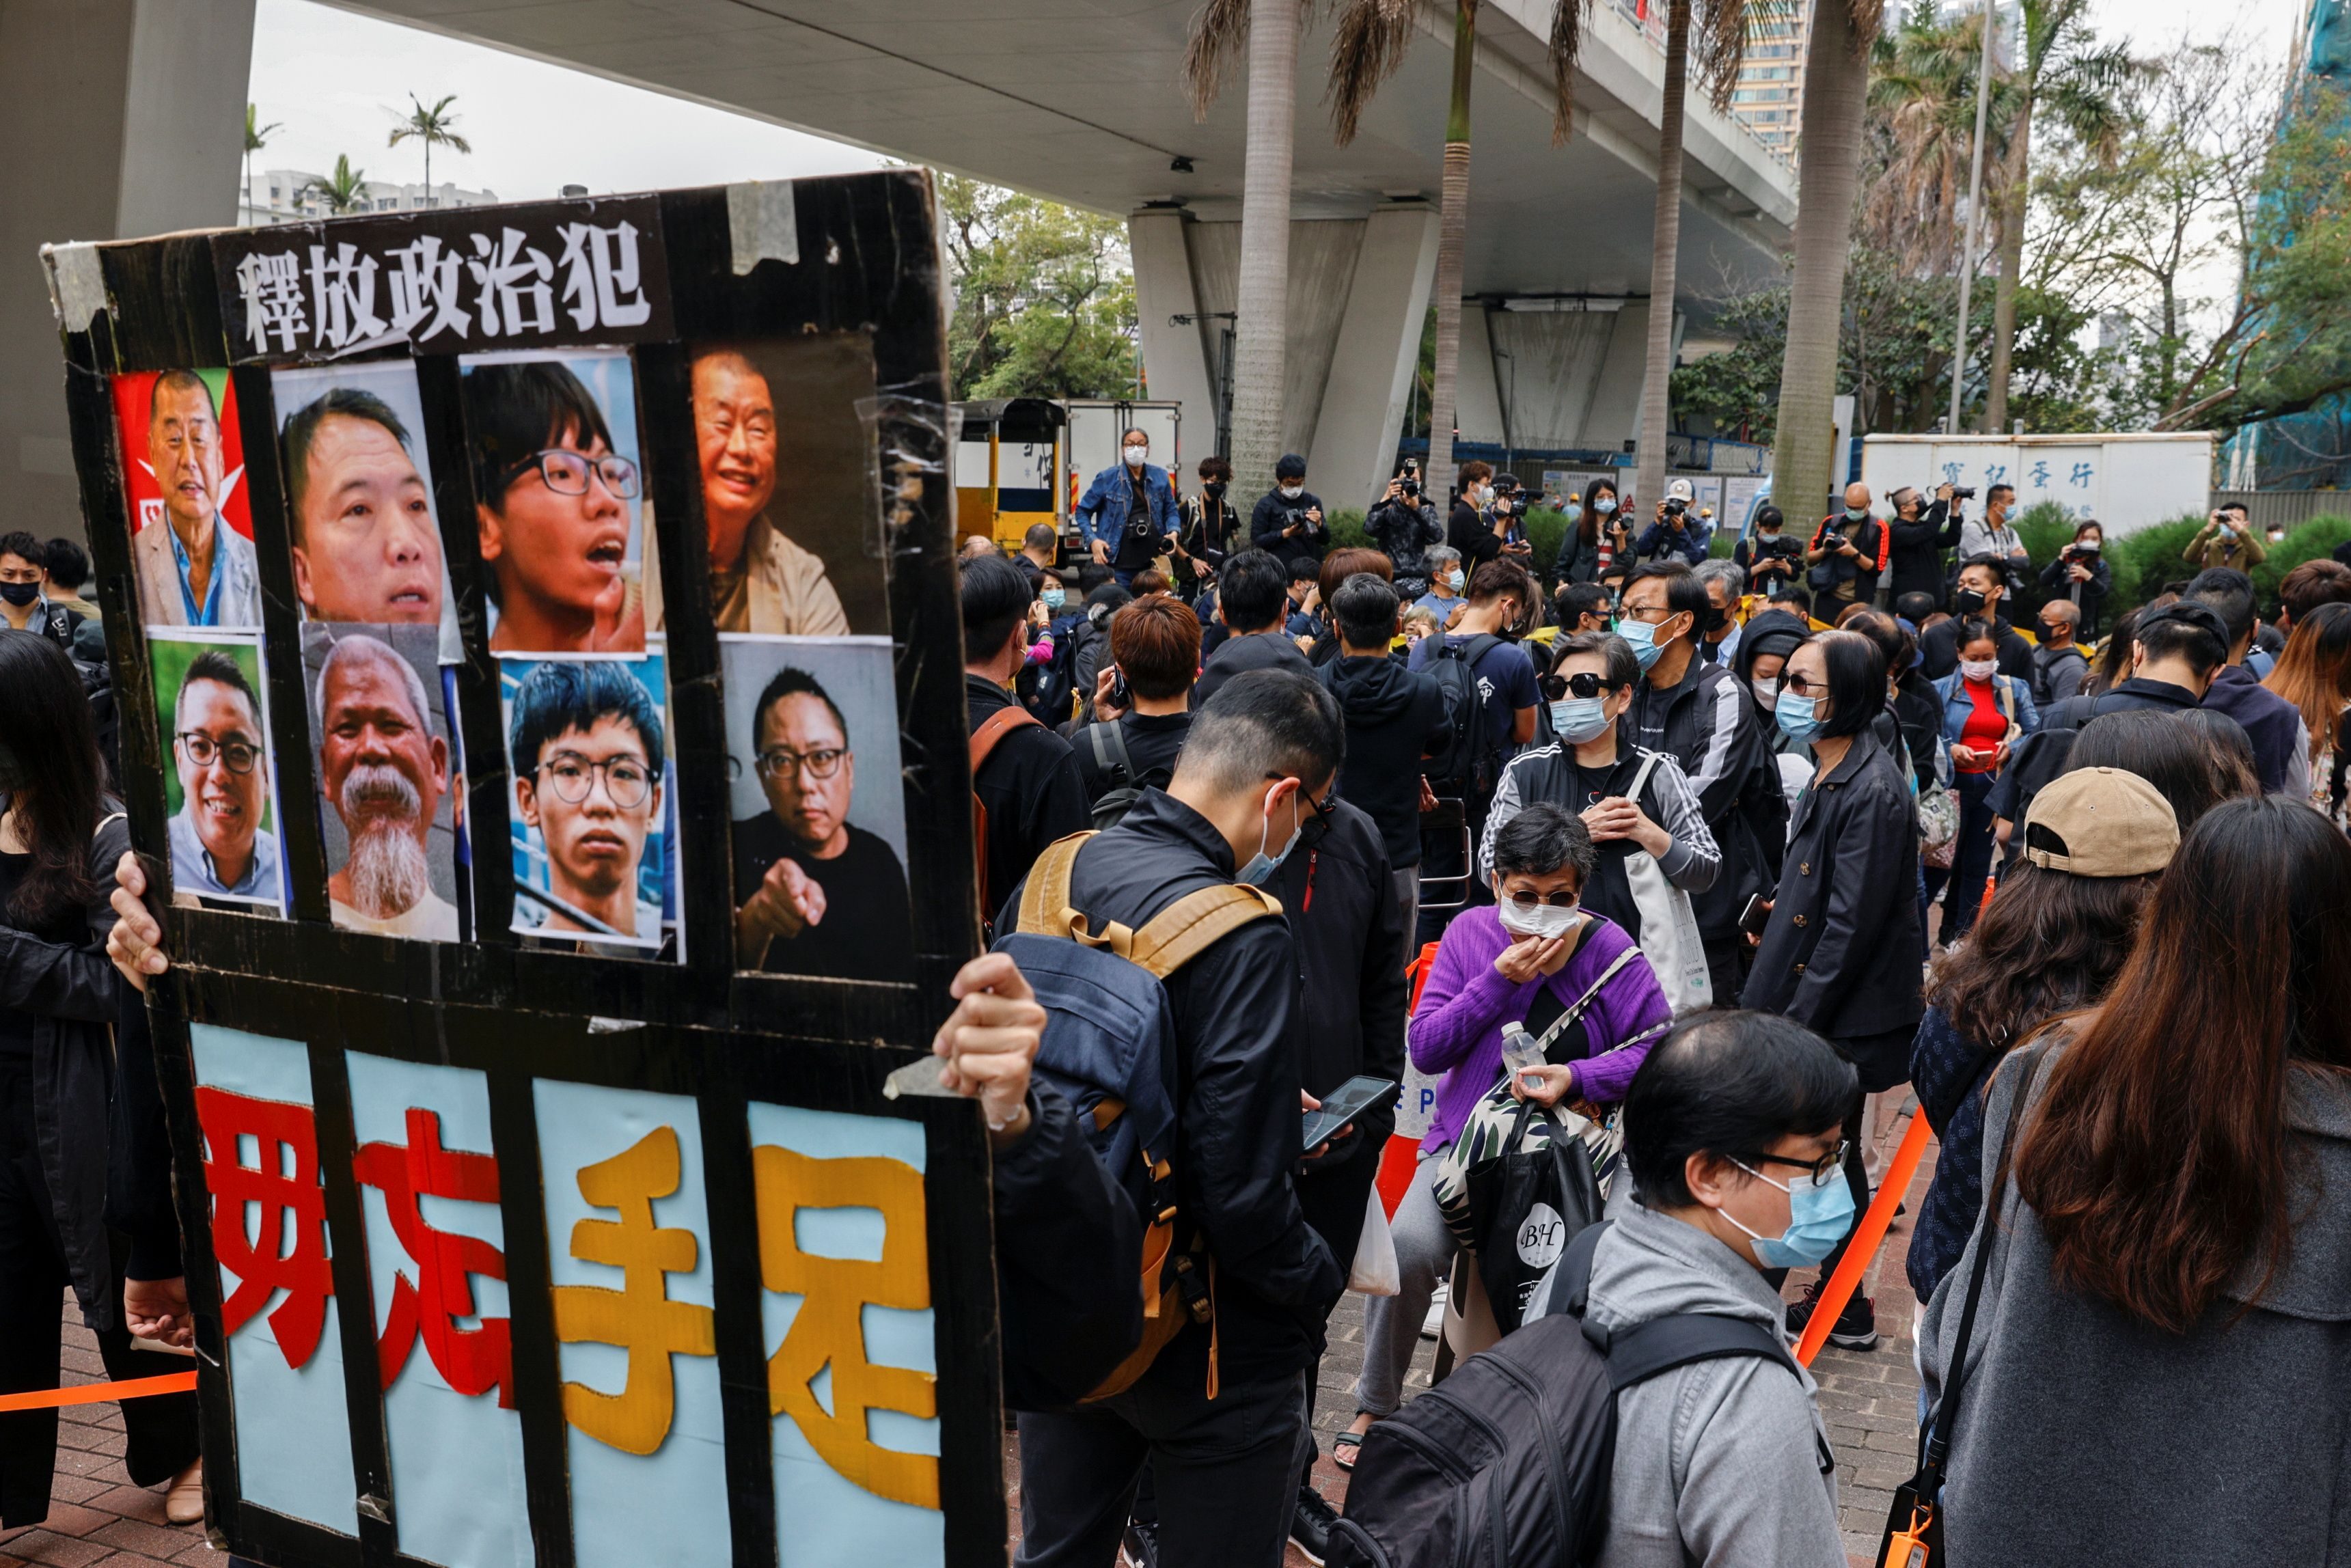 Hong Kong activists chant protest slogans as crowds gather for subversion hearing